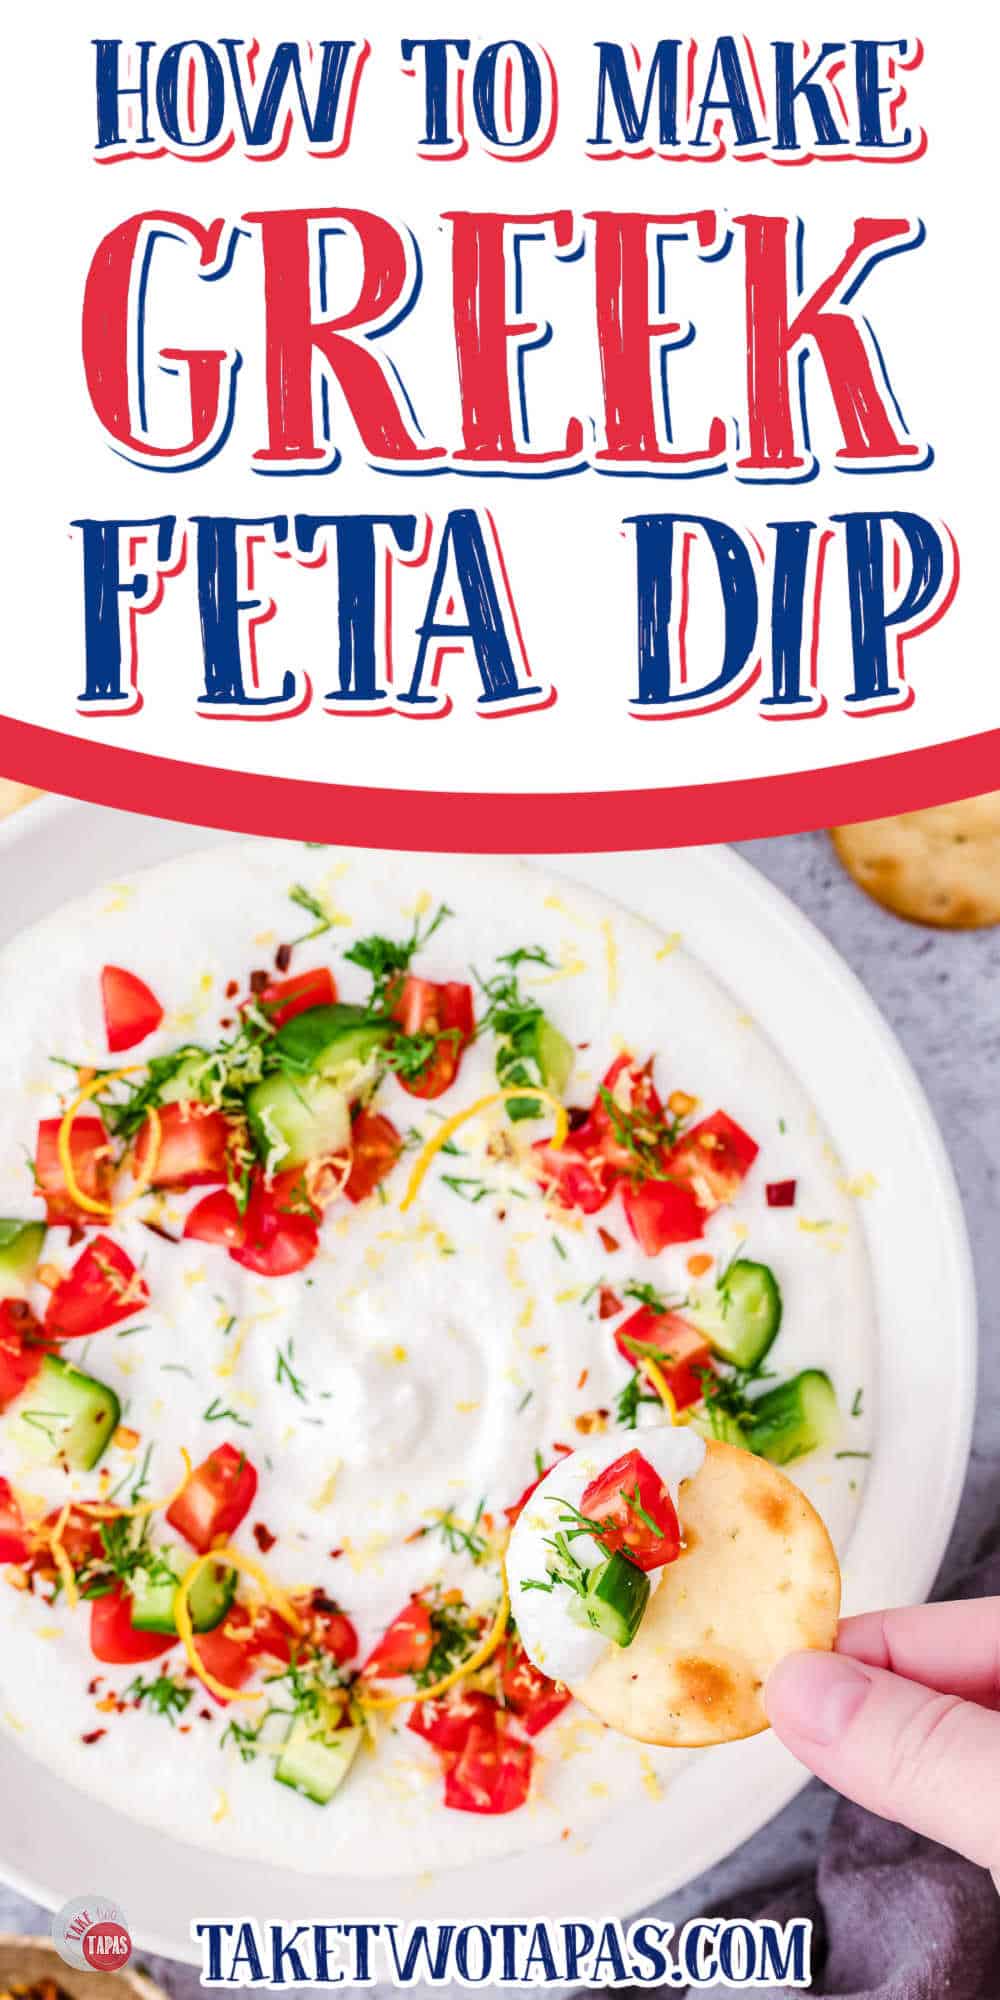 bowl of feta dip topped with dill with a white banned and blue text